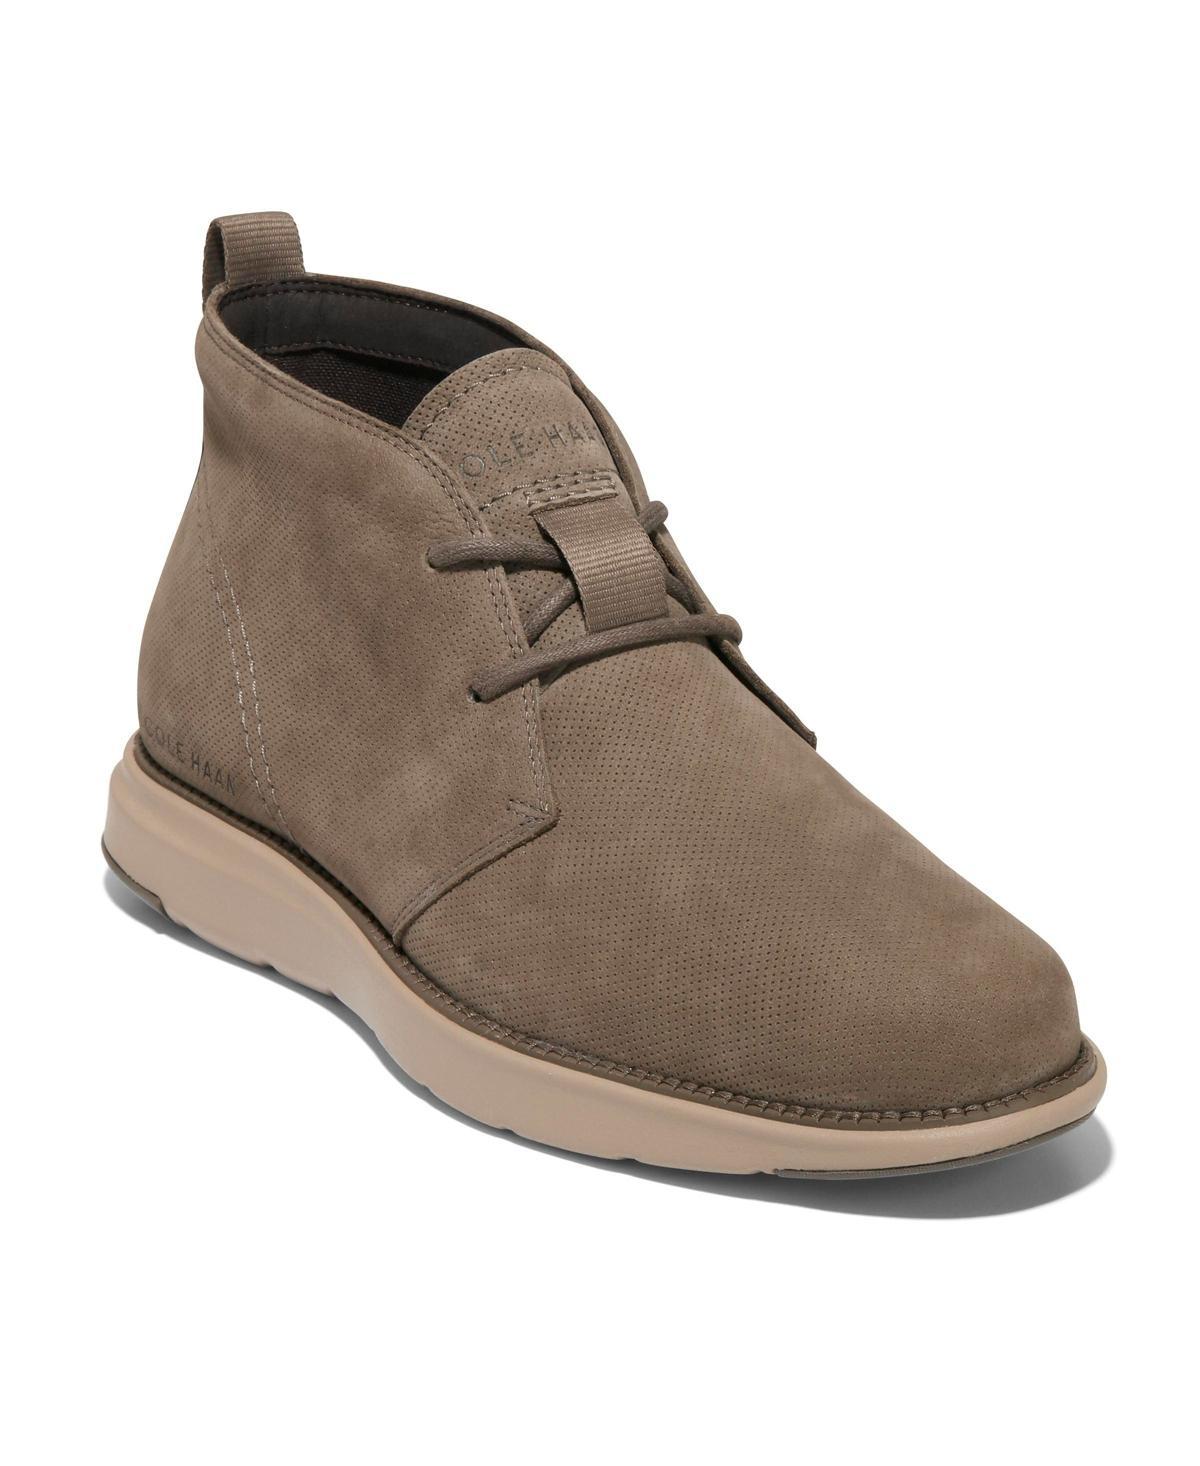 Cole Haan Mens Grand Atlantic Perforated Suede Chukka Boots - Brown Product Image